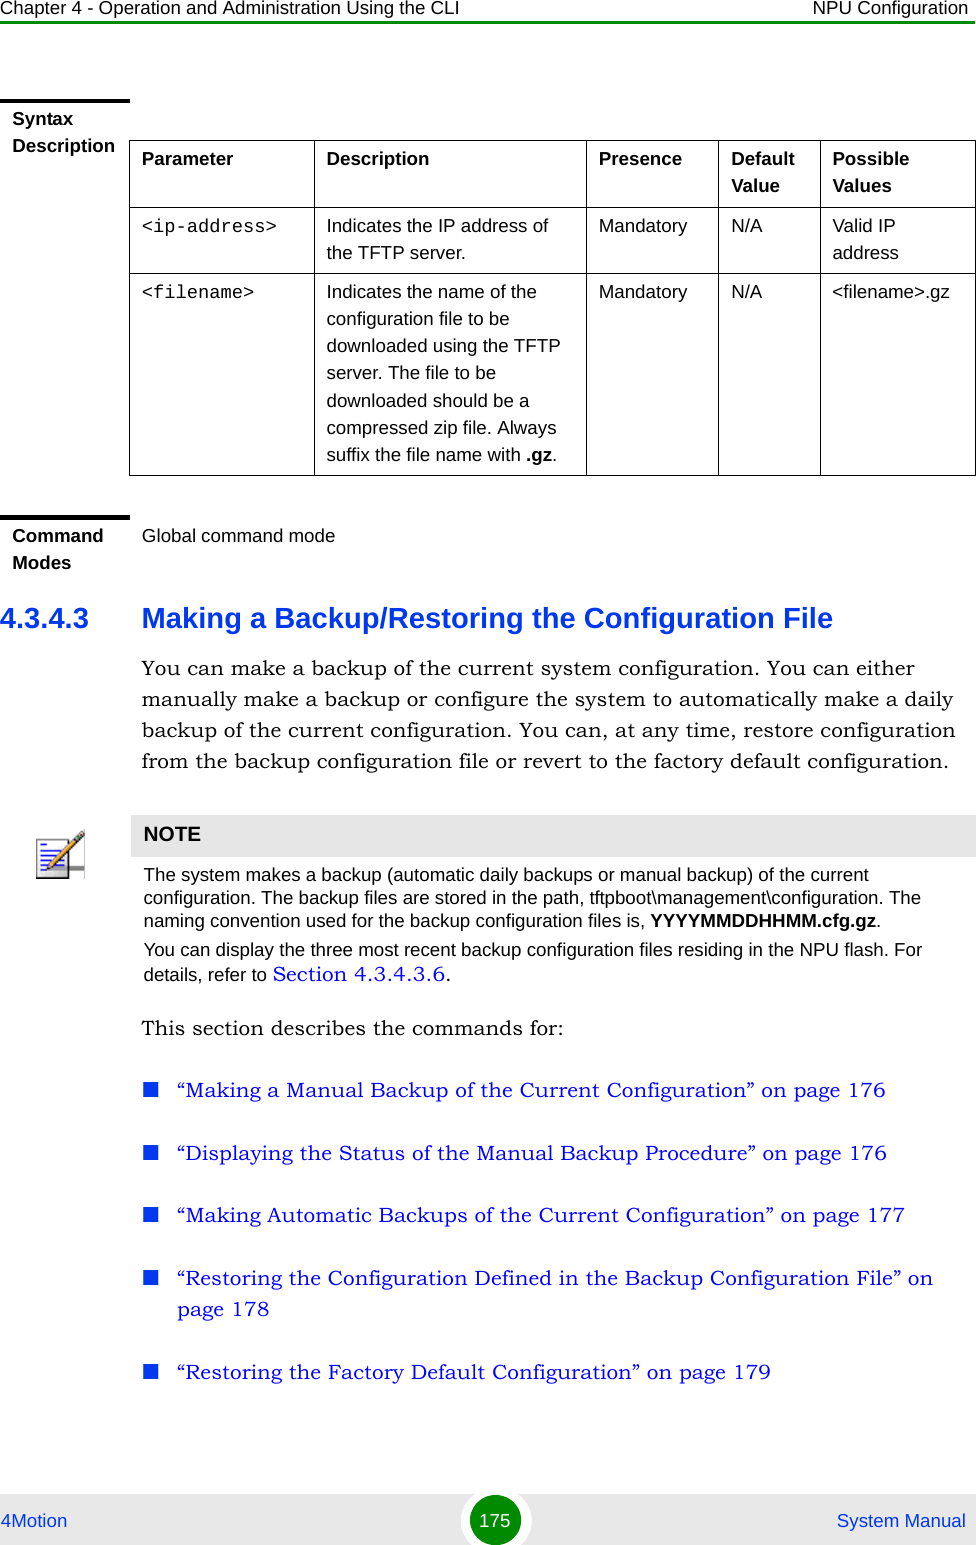 Chapter 4 - Operation and Administration Using the CLI NPU Configuration4Motion 175  System Manual4.3.4.3 Making a Backup/Restoring the Configuration FileYou can make a backup of the current system configuration. You can either manually make a backup or configure the system to automatically make a daily backup of the current configuration. You can, at any time, restore configuration from the backup configuration file or revert to the factory default configuration. This section describes the commands for:“Making a Manual Backup of the Current Configuration” on page 176“Displaying the Status of the Manual Backup Procedure” on page 176“Making Automatic Backups of the Current Configuration” on page 177“Restoring the Configuration Defined in the Backup Configuration File” on page 178“Restoring the Factory Default Configuration” on page 179Syntax Description Parameter Description Presence Default ValuePossible Values&lt;ip-address&gt; Indicates the IP address of the TFTP server.Mandatory N/A Valid IP address&lt;filename&gt; Indicates the name of the configuration file to be downloaded using the TFTP server. The file to be downloaded should be a compressed zip file. Always suffix the file name with .gz.Mandatory N/A &lt;filename&gt;.gzCommand ModesGlobal command modeNOTEThe system makes a backup (automatic daily backups or manual backup) of the current configuration. The backup files are stored in the path, tftpboot\management\configuration. The naming convention used for the backup configuration files is, YYYYMMDDHHMM.cfg.gz.You can display the three most recent backup configuration files residing in the NPU flash. For details, refer to Section 4.3.4.3.6.